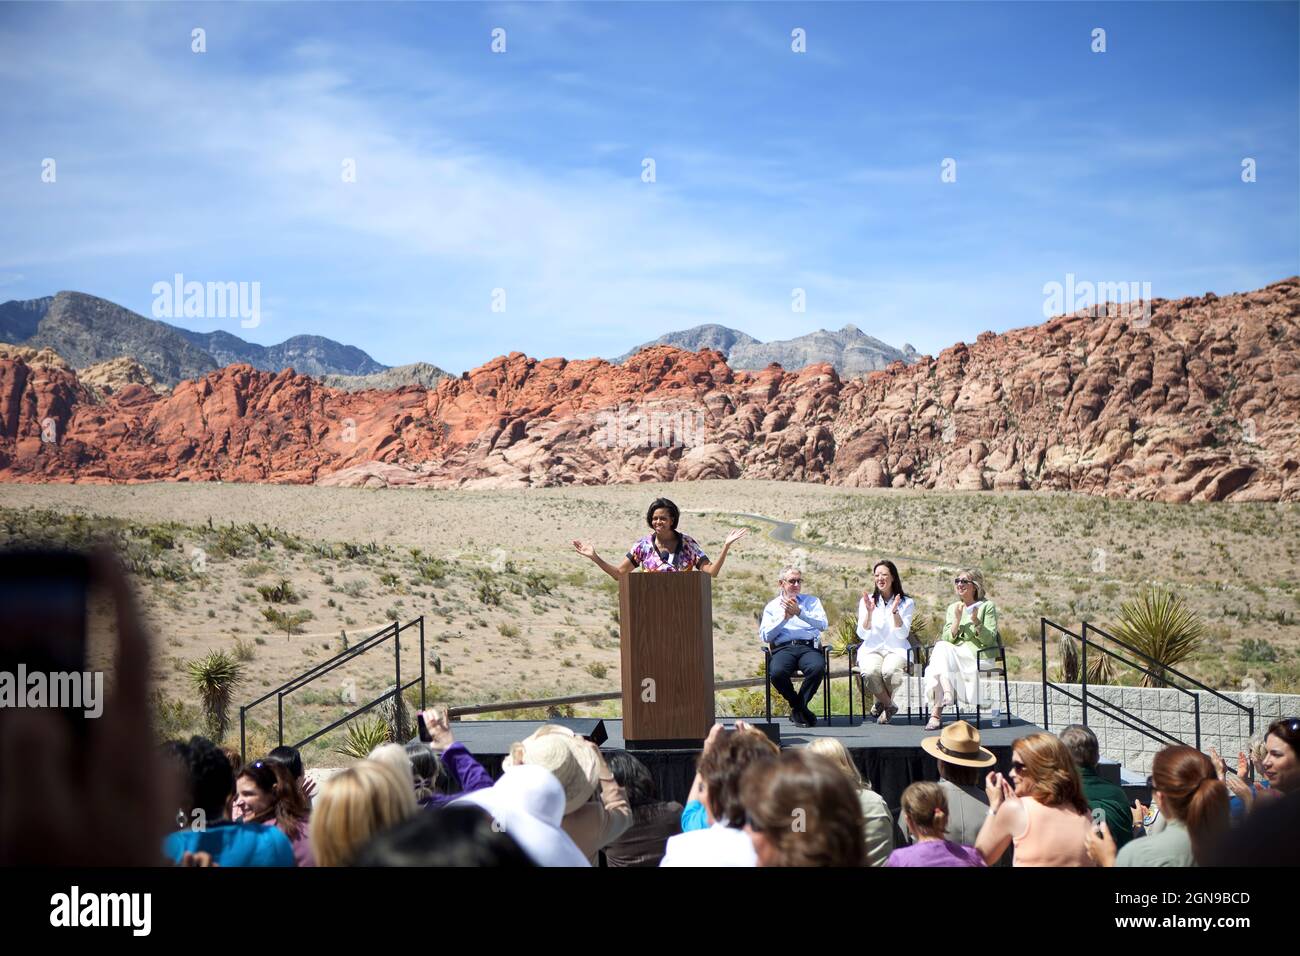 First Lady Michelle makes remarks during the launch of 'Let's Move Outside', an extension of her 'Let's Move!' initiative, at the Visitors' Center in Red Rock Canyon, Nev., June 1, 2010. (Official White House Photo by Samantha Appleton) This official White House photograph is being made available only for publication by news organizations and/or for personal use printing by the subject(s) of the photograph. The photograph may not be manipulated in any way and may not be used in commercial or political materials, advertisements, emails, products, promotions that in any way suggests approval or Stock Photo